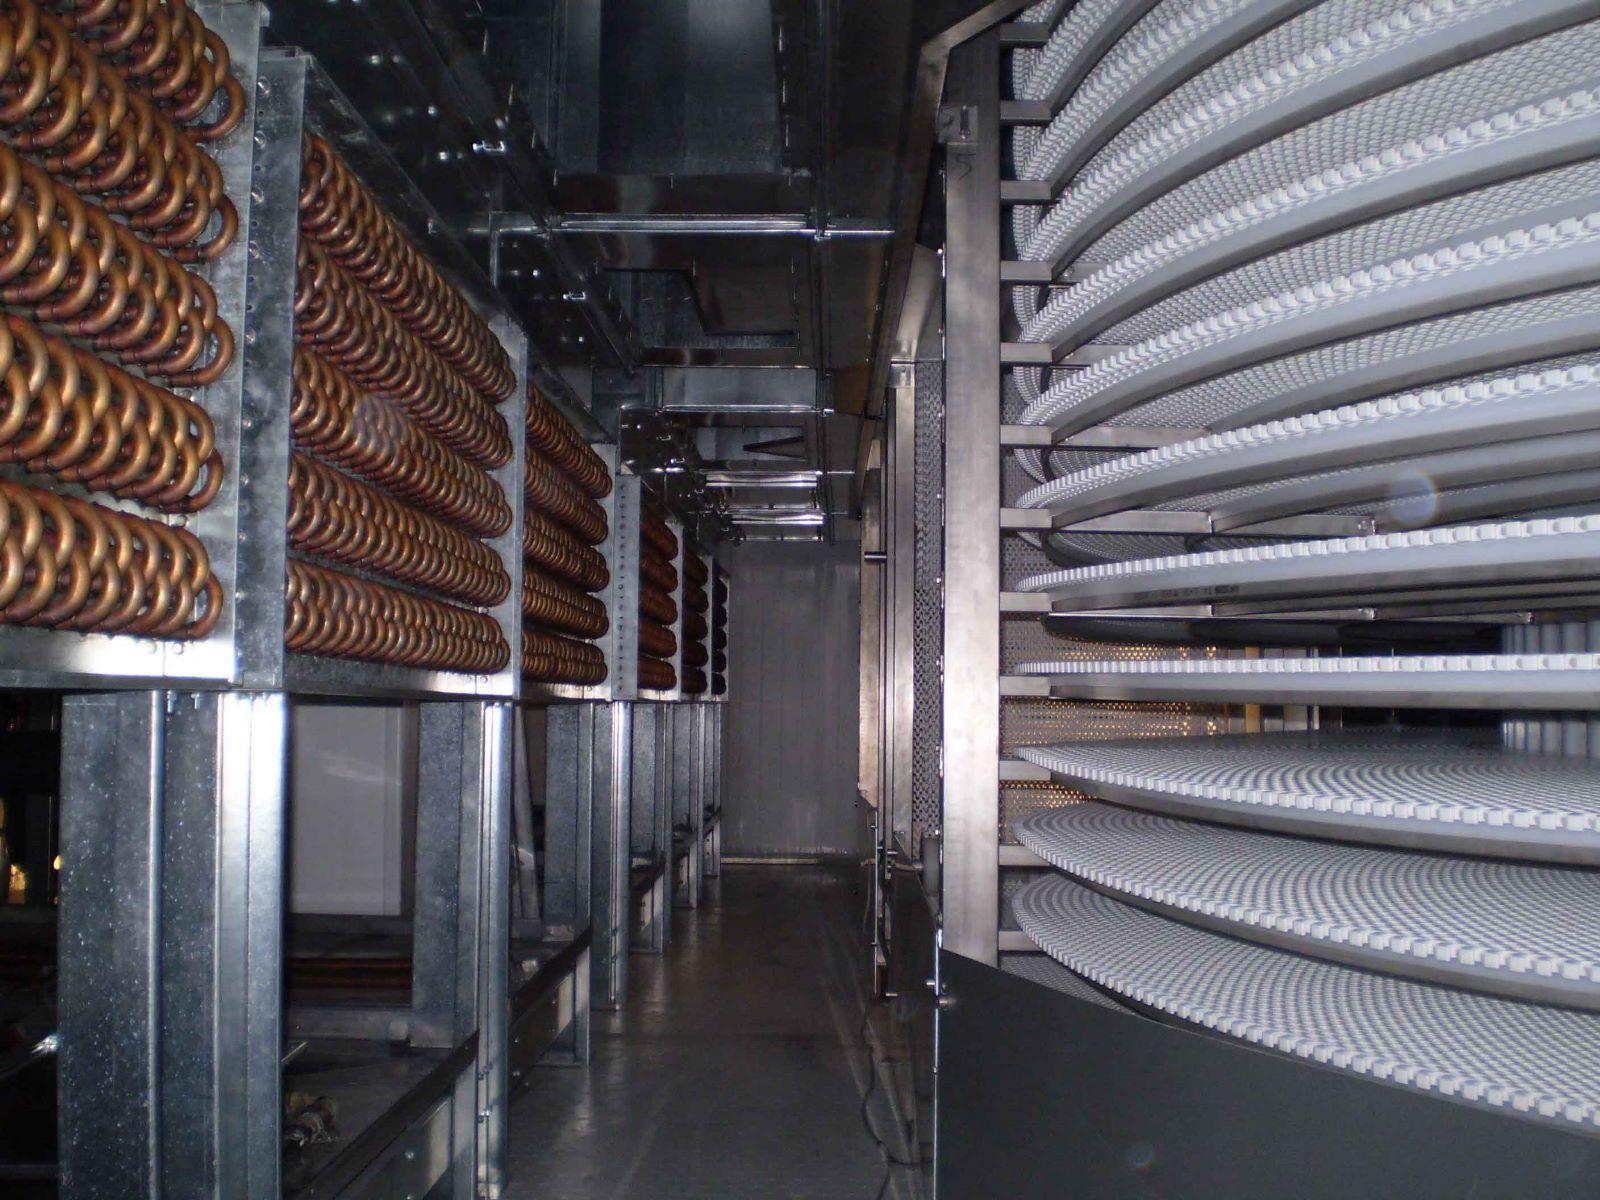 Heat exchangers coils freon-powered